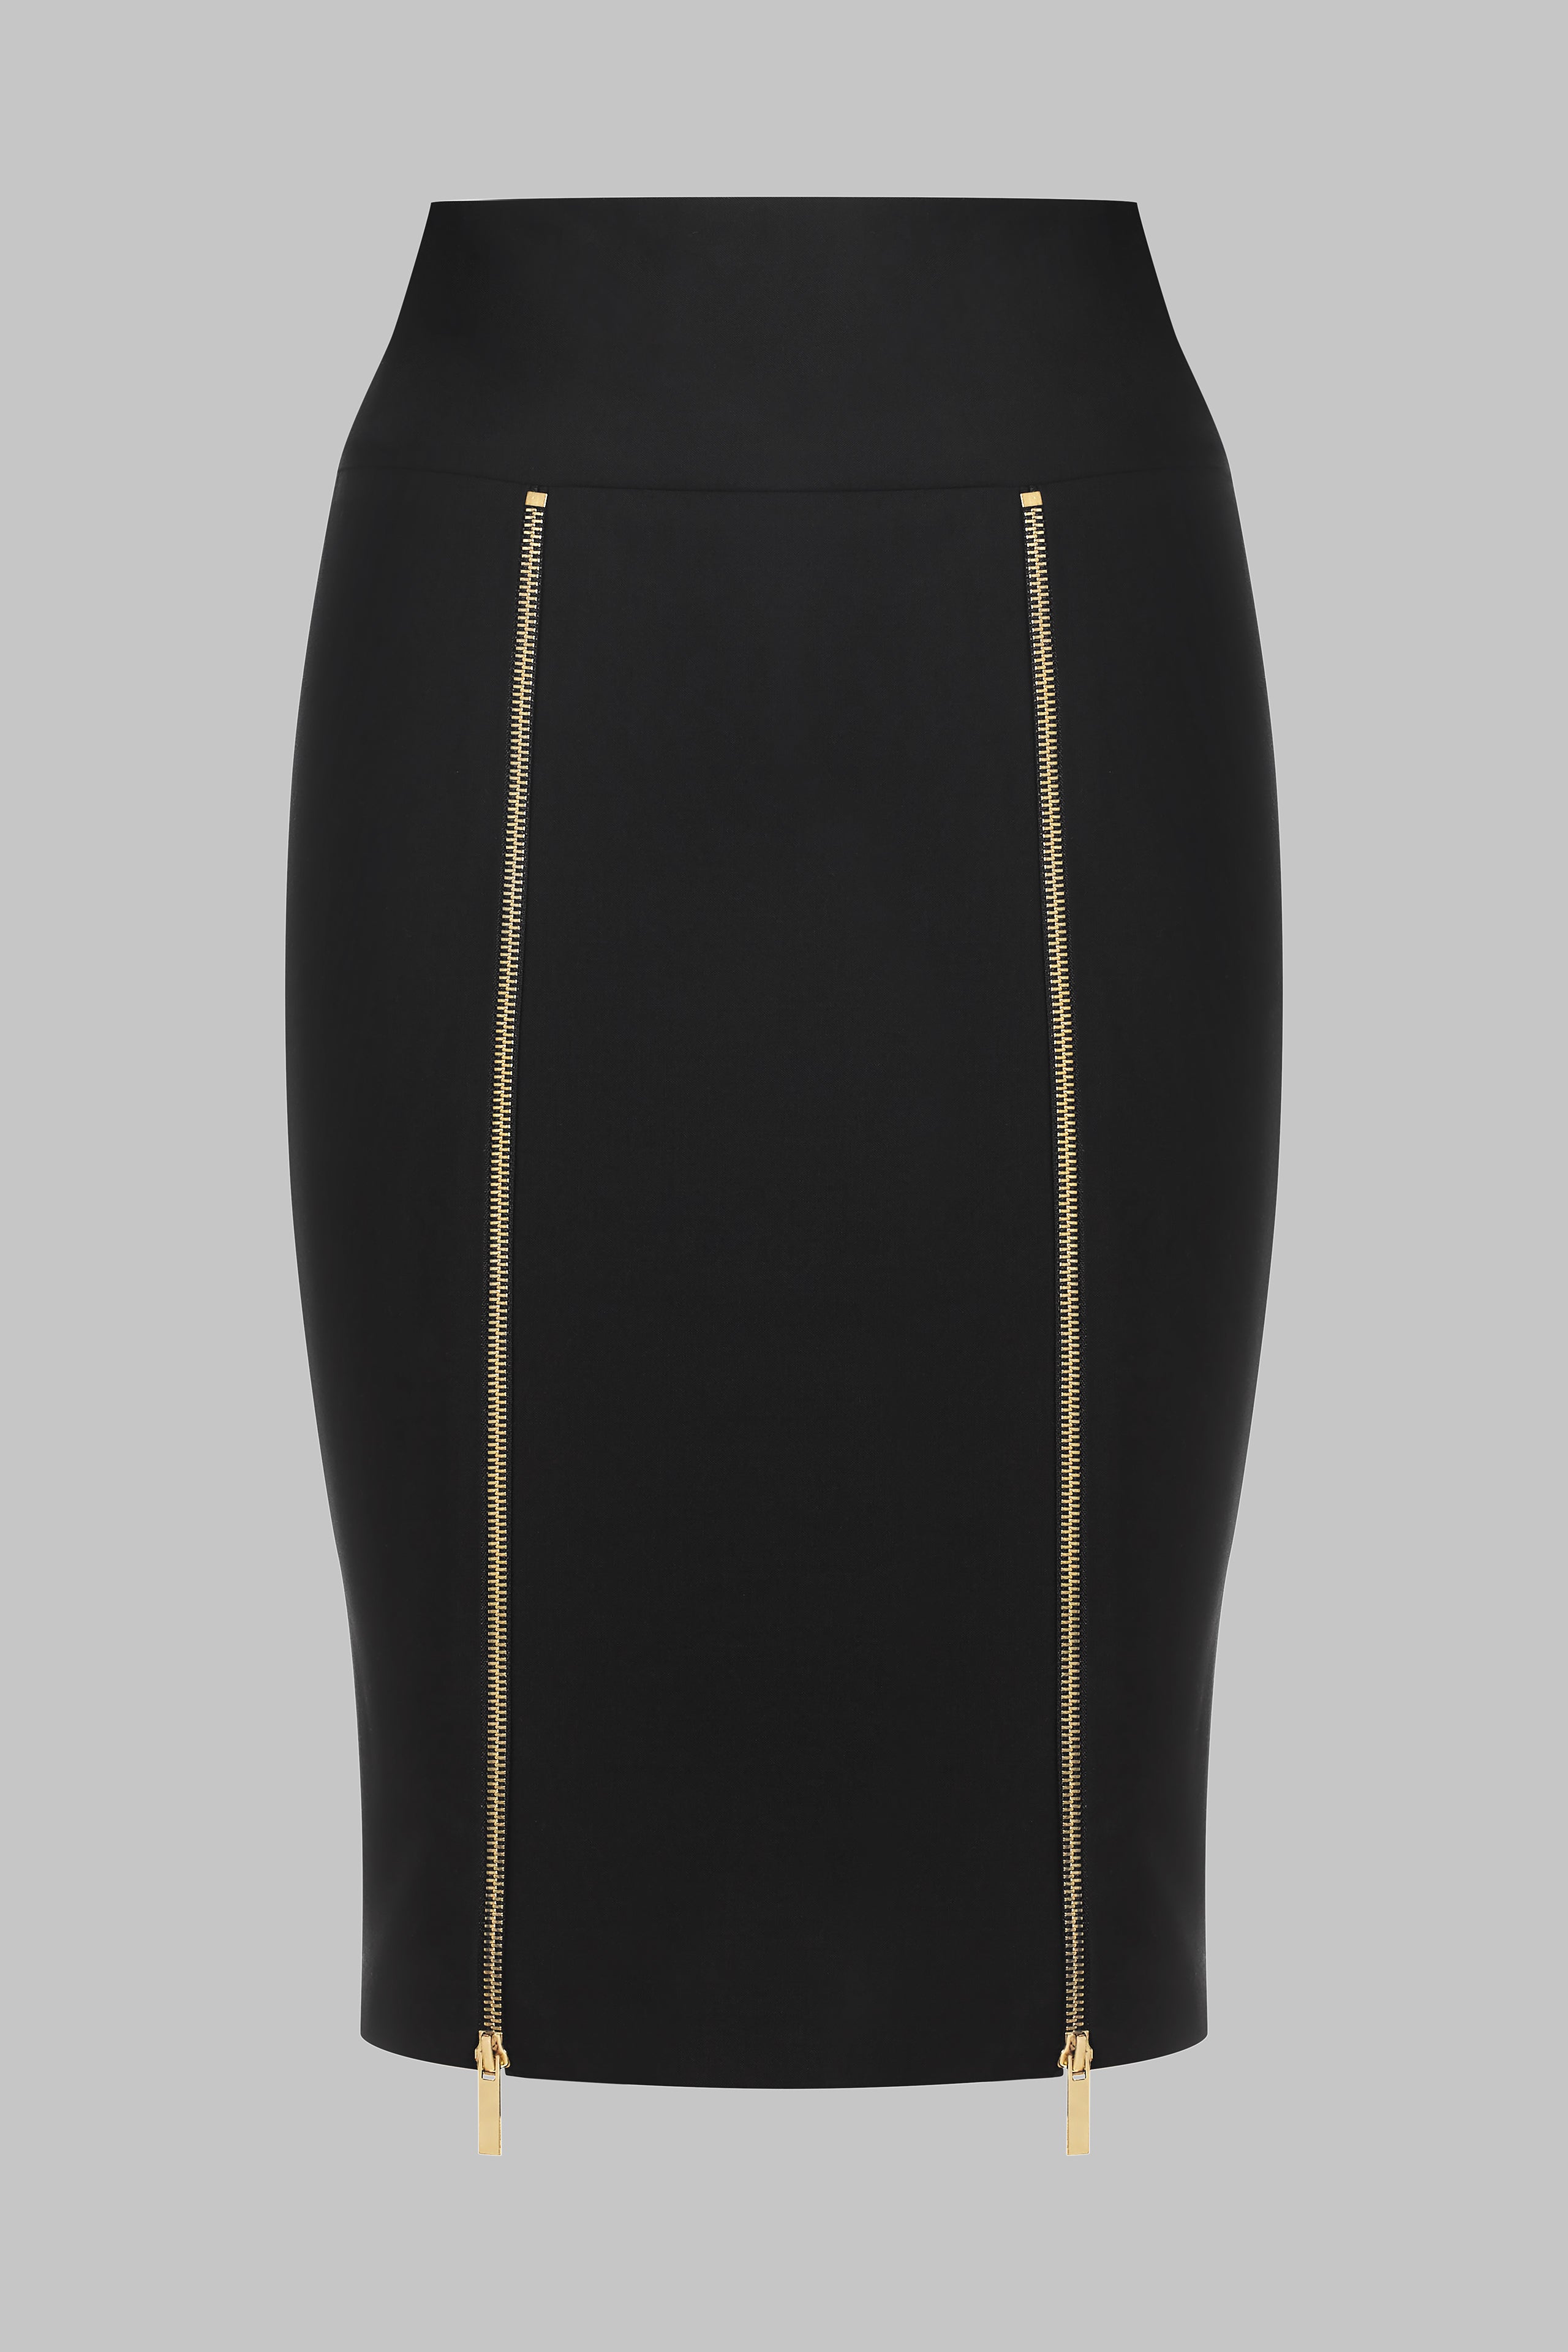 007 - Wool pencil skirt with zip